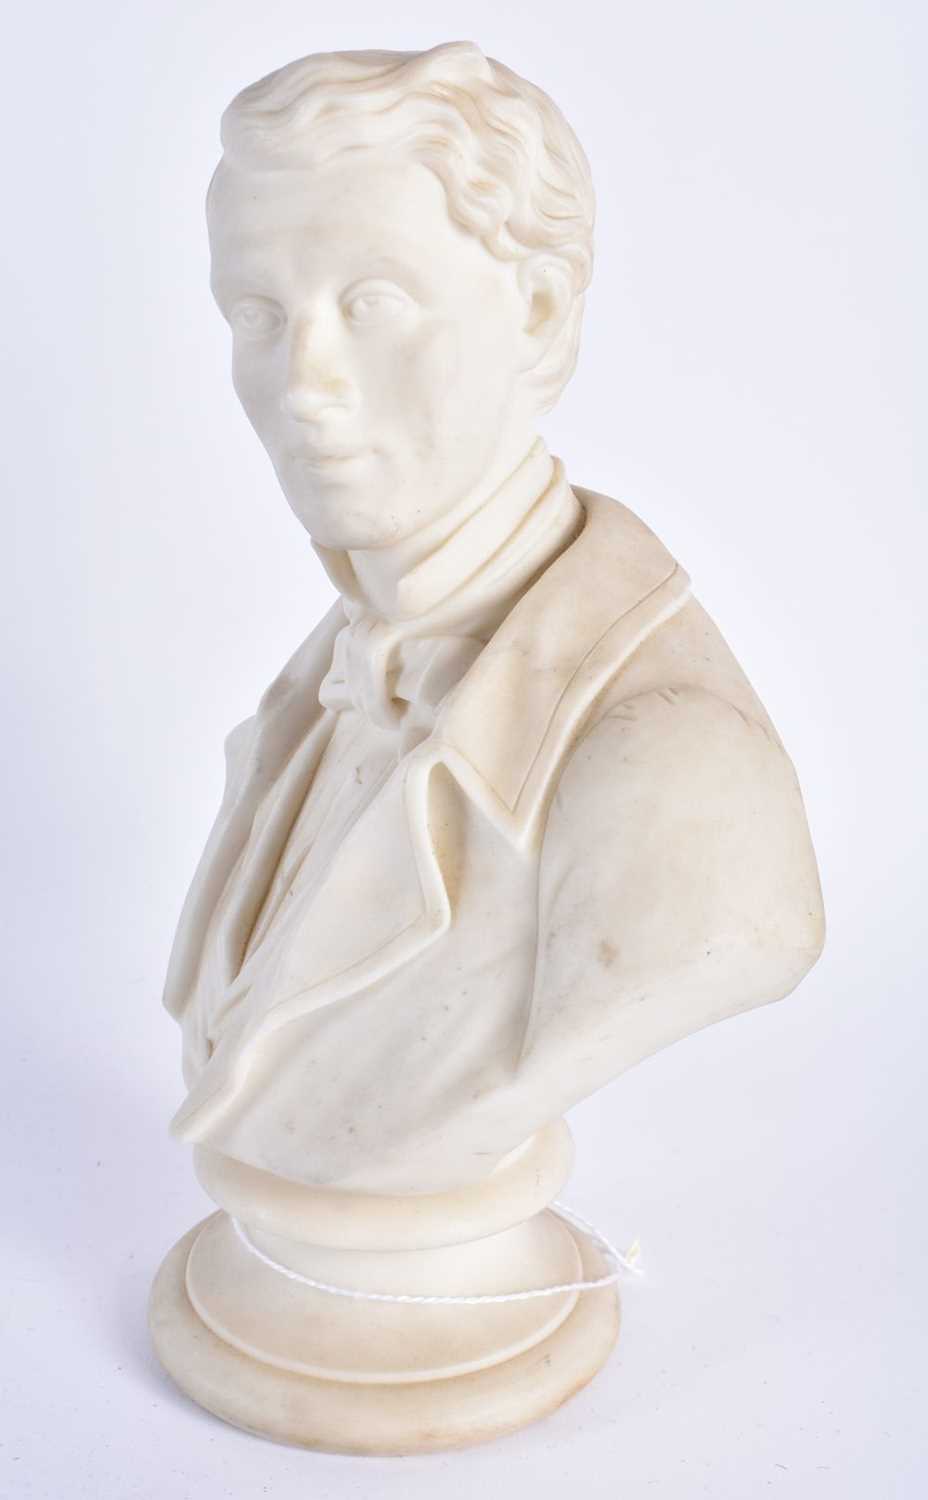 A 19TH CENTURY KERR & BINNS WORCESTER PARIAN WARE BUST OF A MALE. 22 cm x 12 cm. - Image 2 of 7